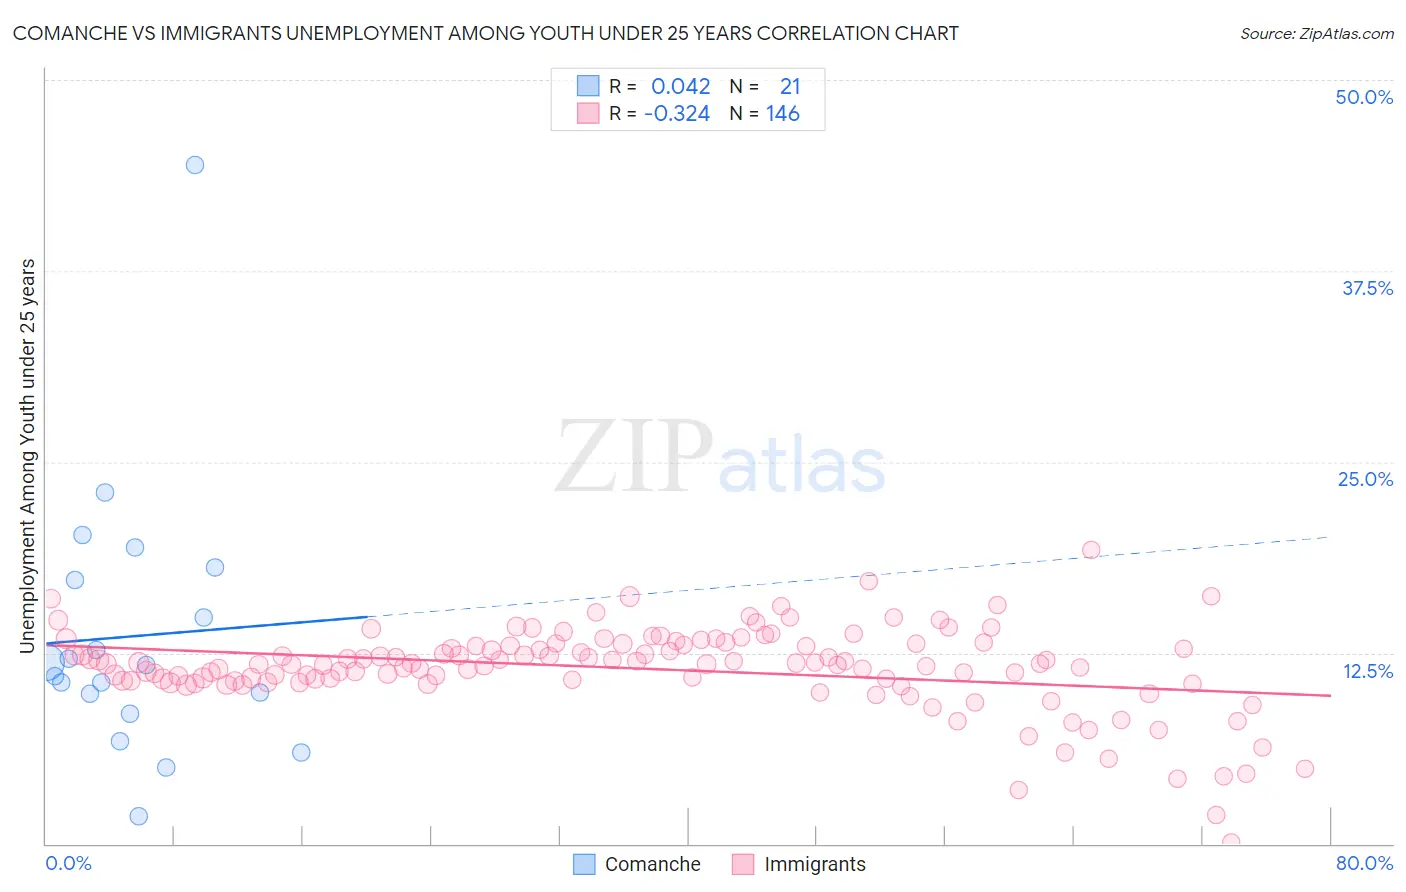 Comanche vs Immigrants Unemployment Among Youth under 25 years